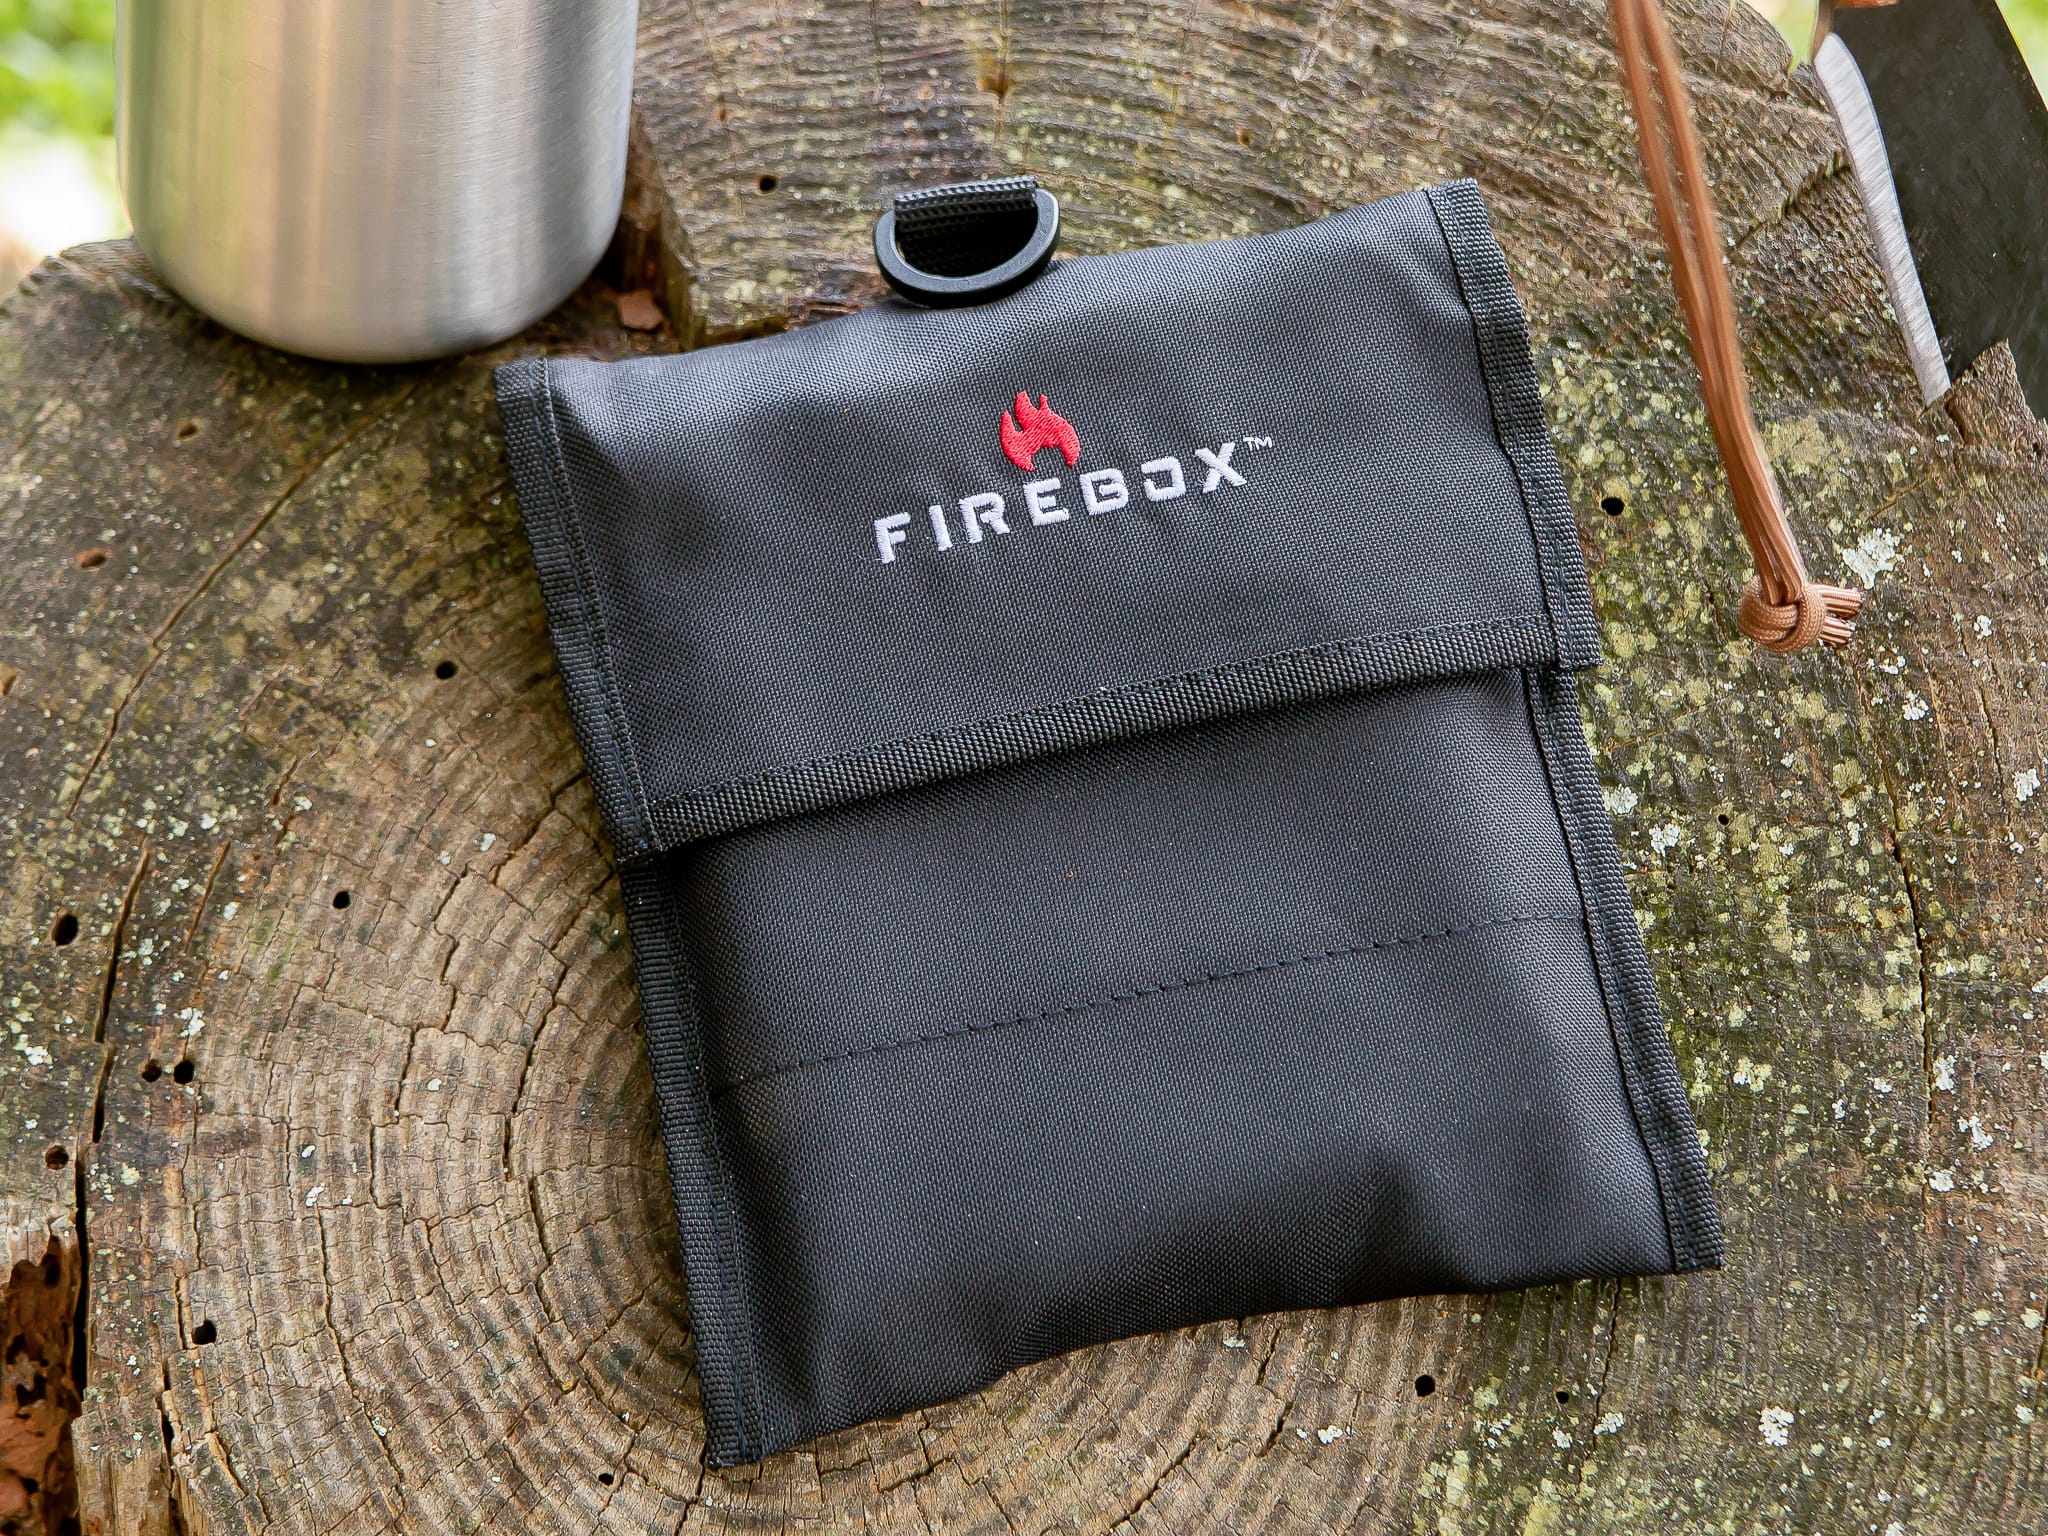 Firebox Stove - 5 Large Camp Stove - Complete Kit - Fiddleback Outpost